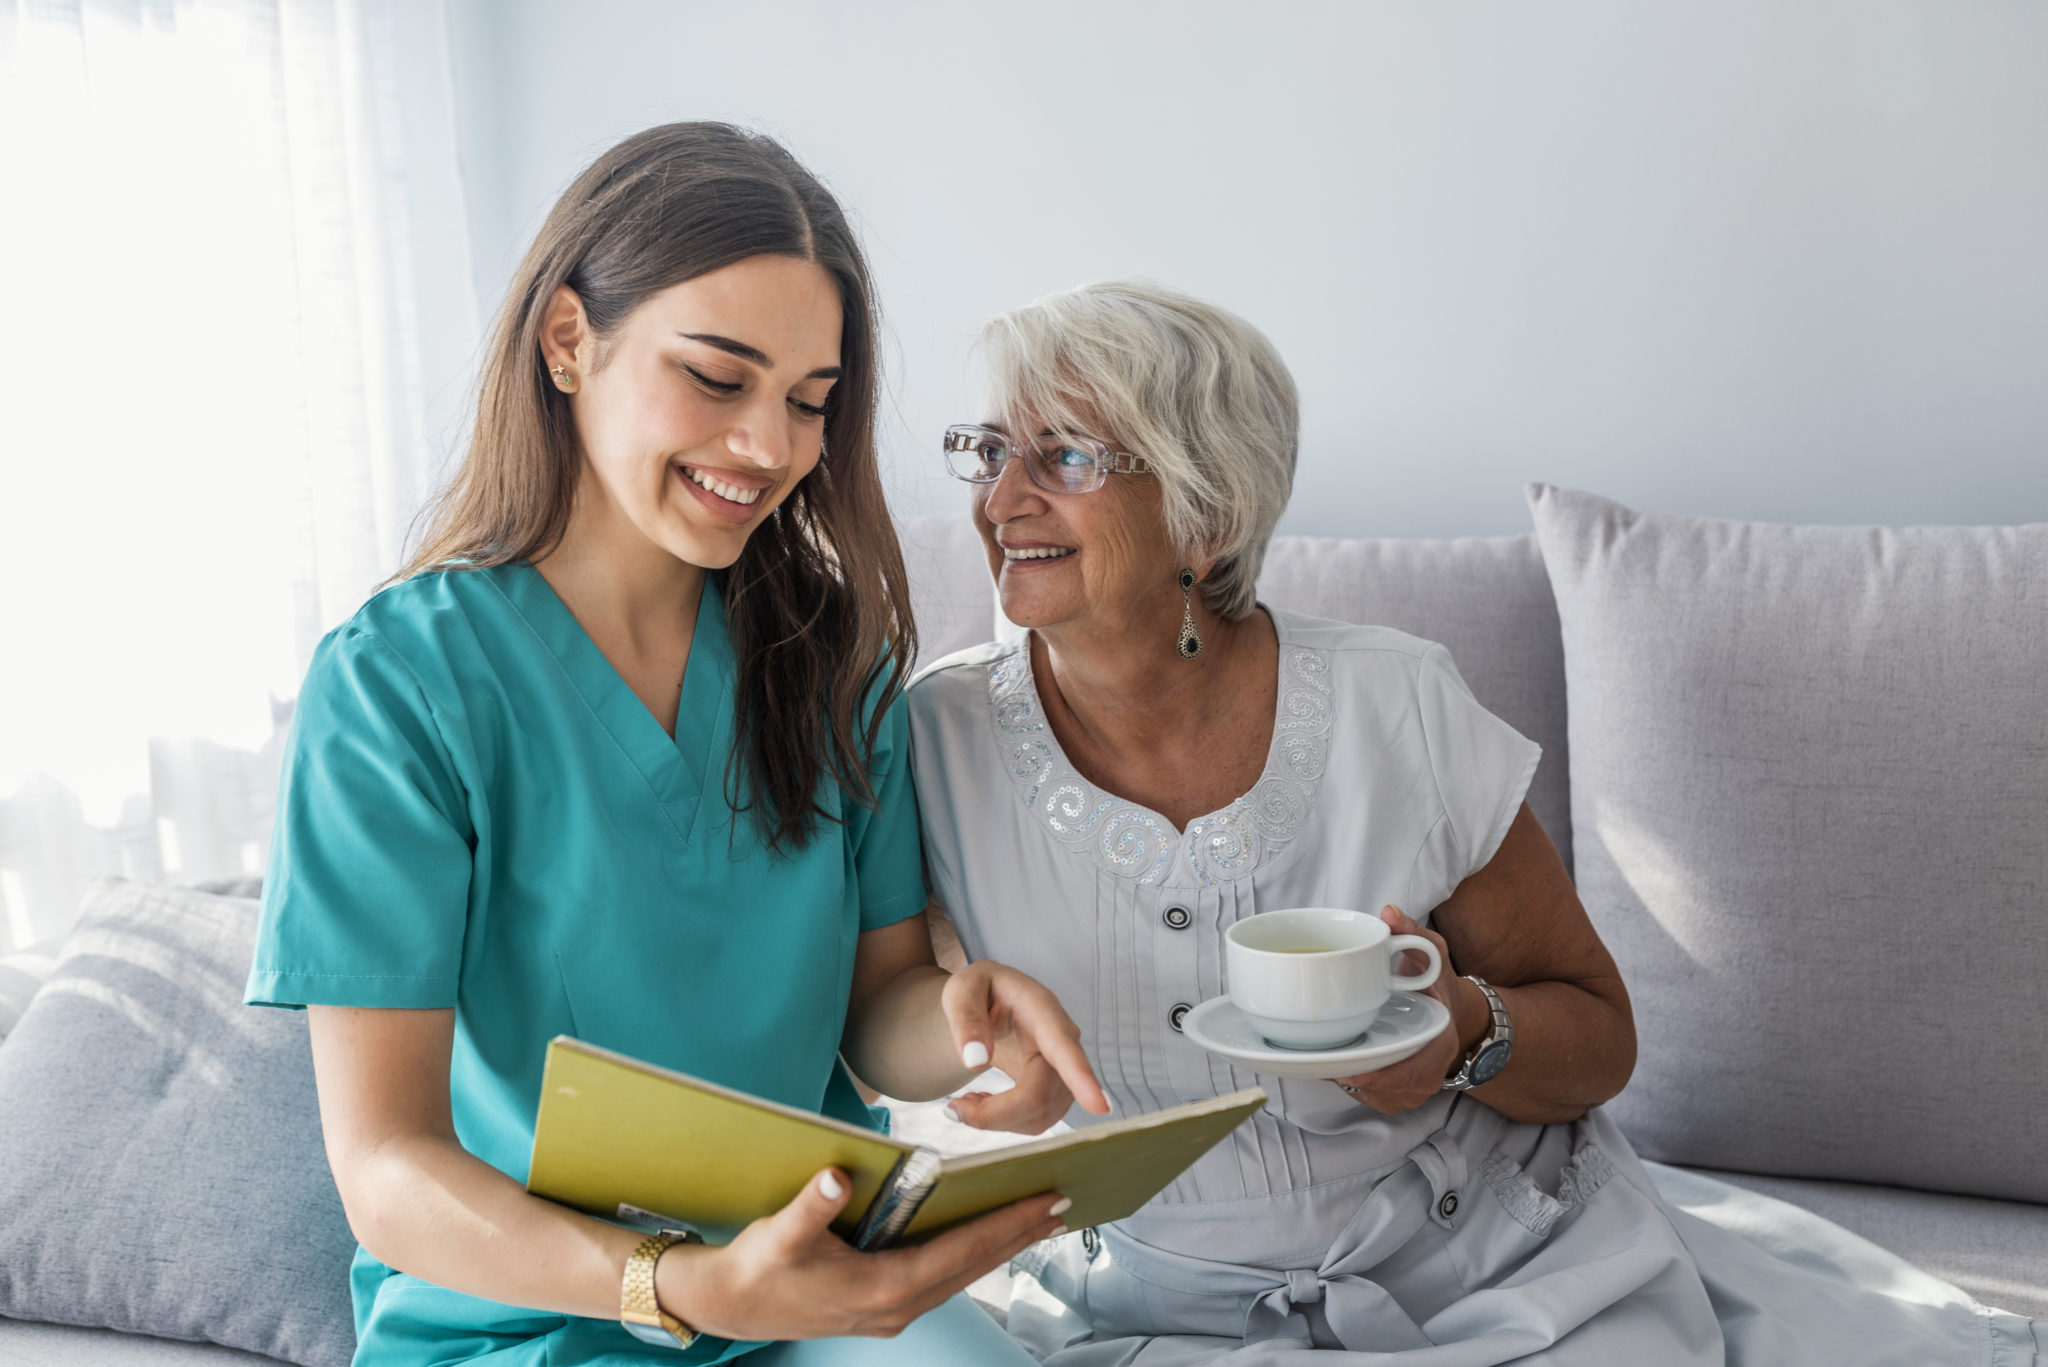 Find In-Home Care Options Near Me